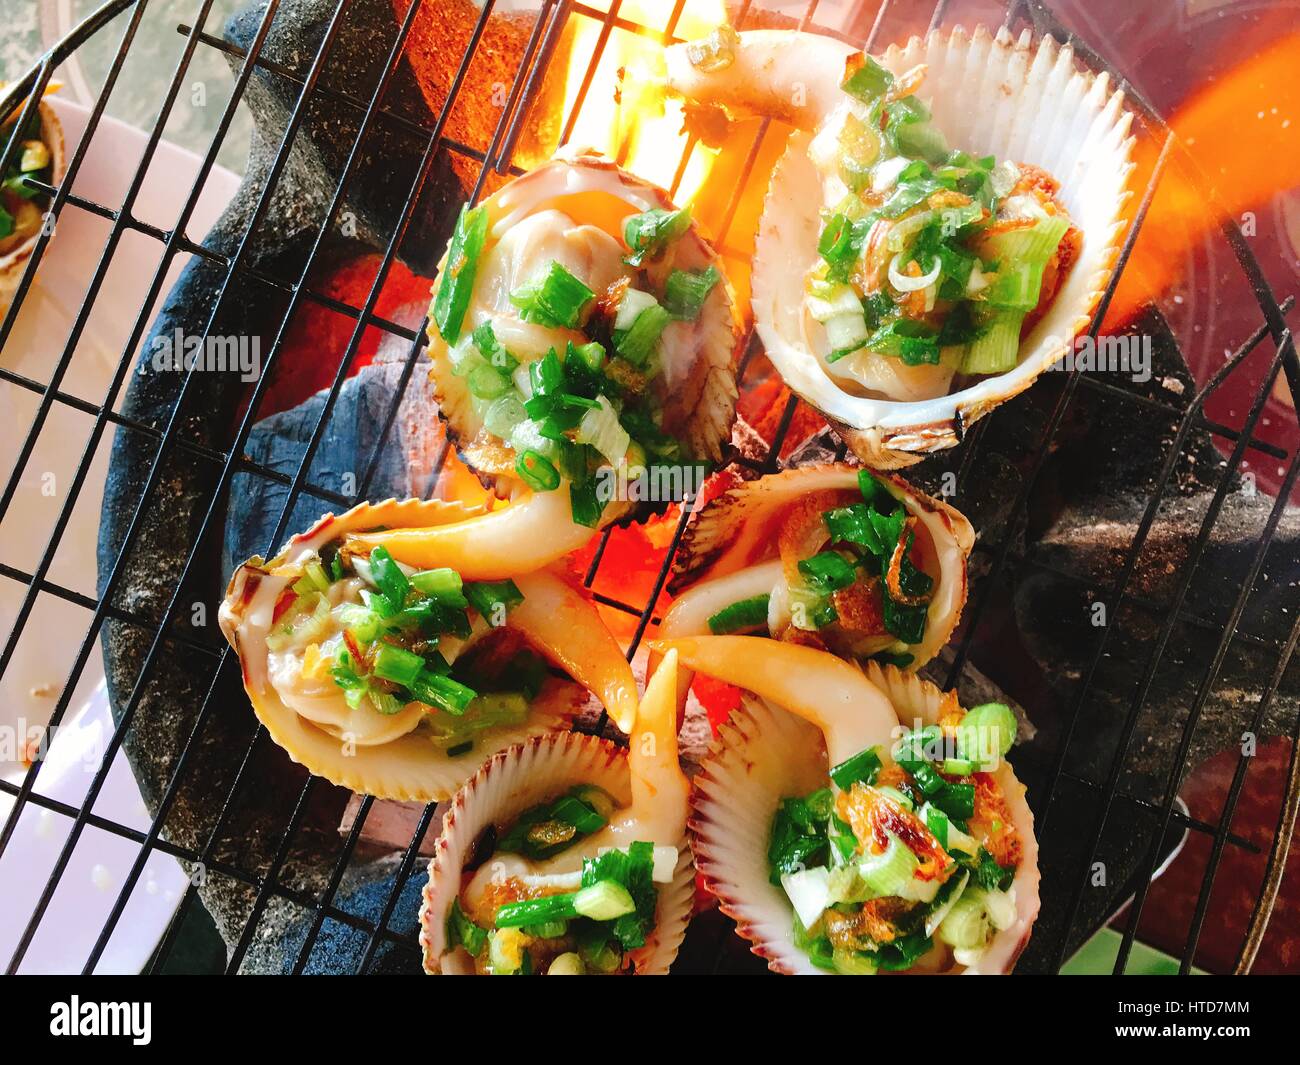 Delicious shell or clams mussels on hot fire coal grill Stock Photo